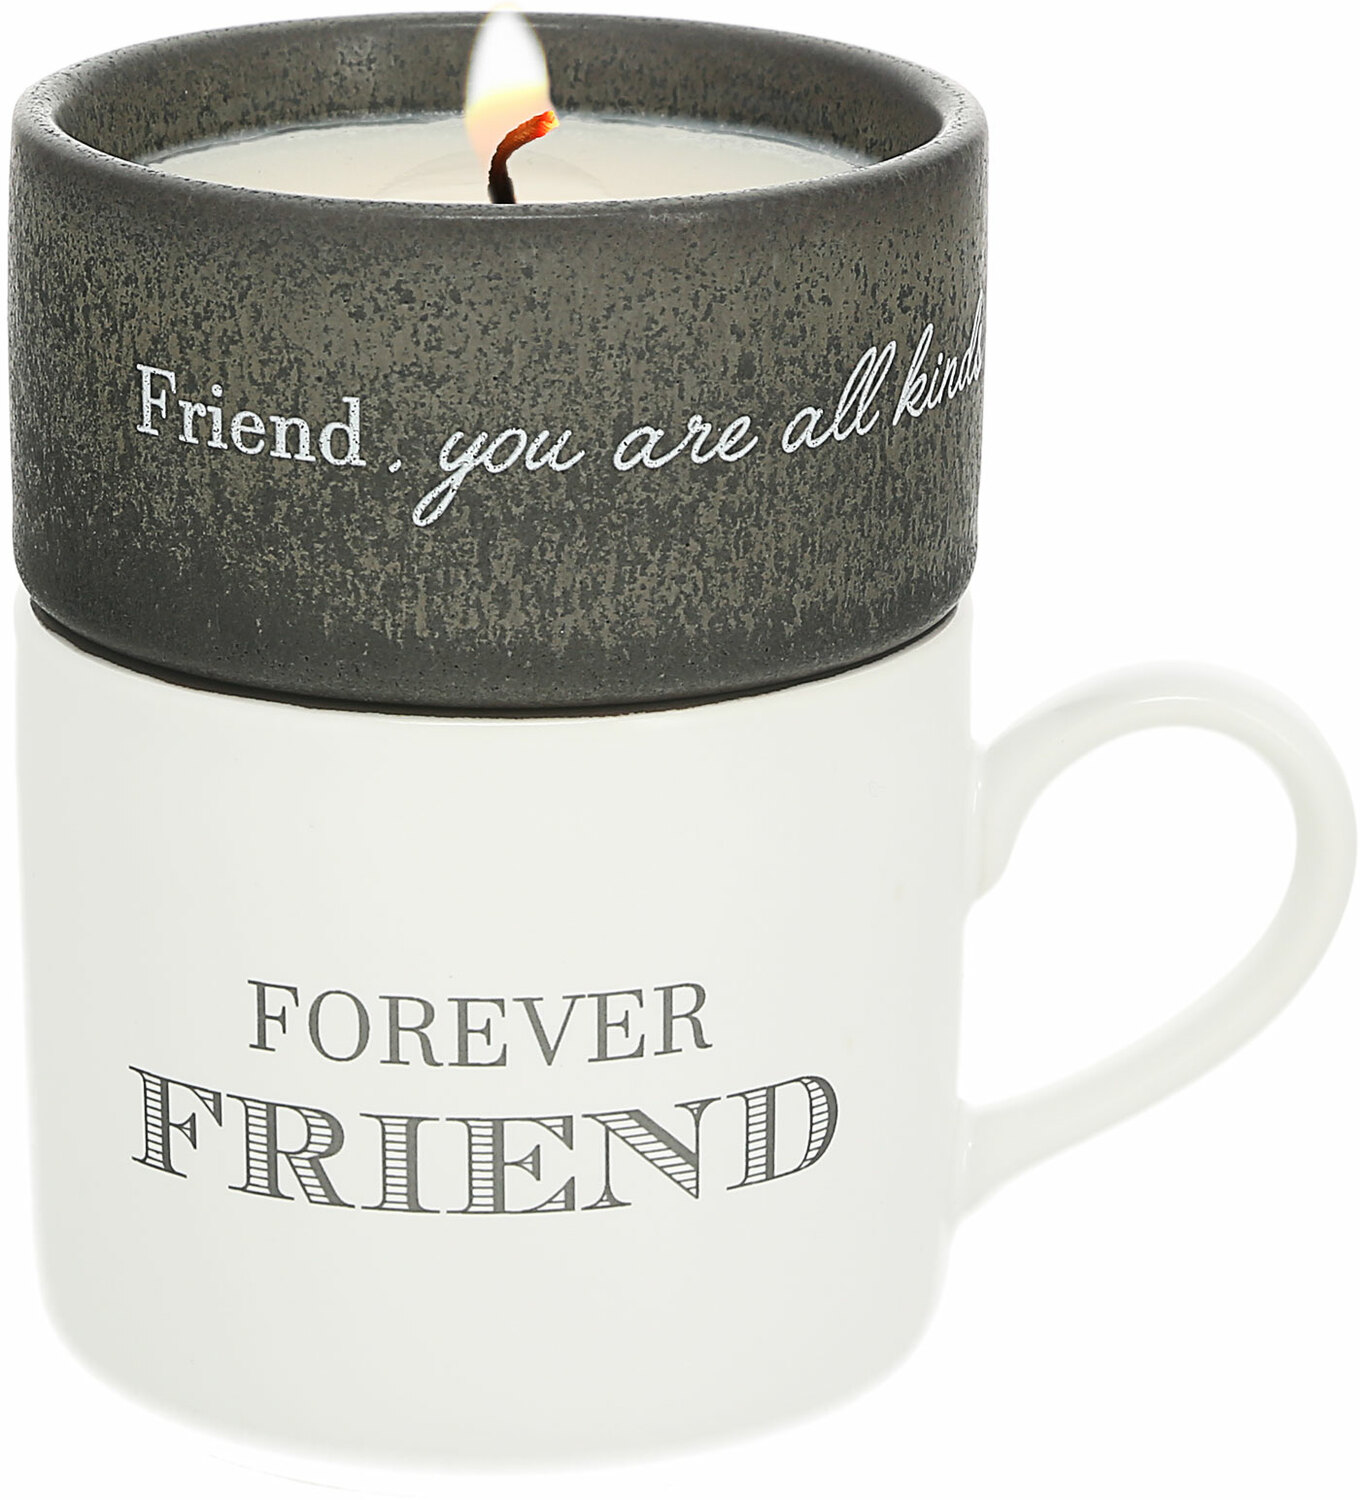 Friend by Filled with Warmth - Friend - Stacking Mug and Candle Set
100% Soy Wax Scent: Tranquility